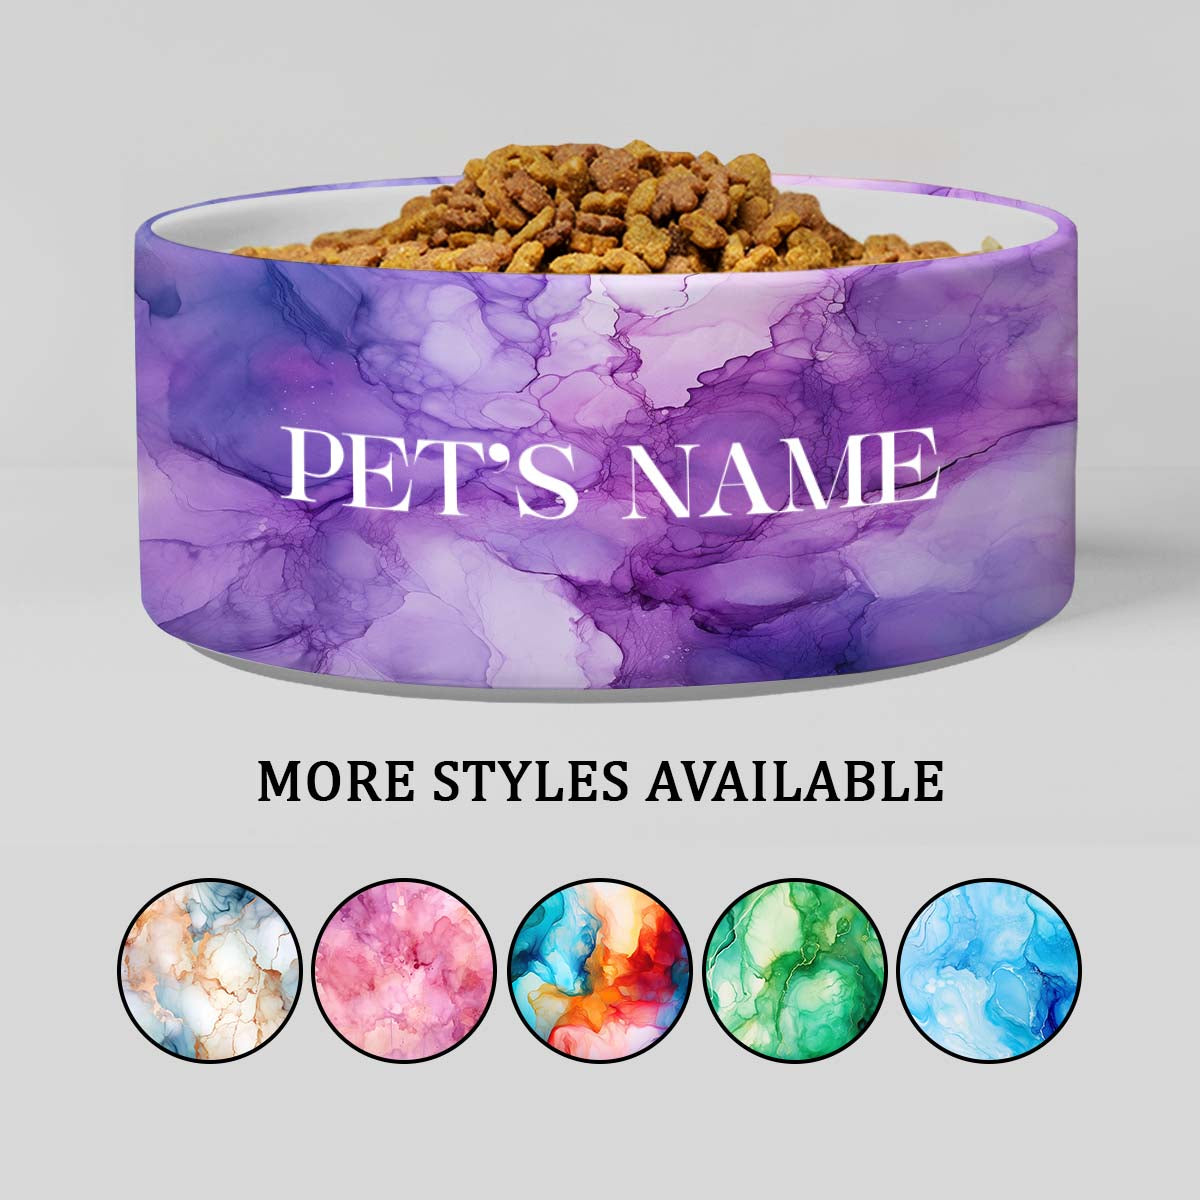 Personalized Dog Pet Cat Bowls, Alcohol Watercolor Ink Custom Pet Bowls for Dogs and Cats, Eclectic Modern Spotted Dishes With Name, Ceramic Custom Cute Dog Bowls, Designer Large and Small Dog Cat Pet Bowls Dish, Gift for Pet